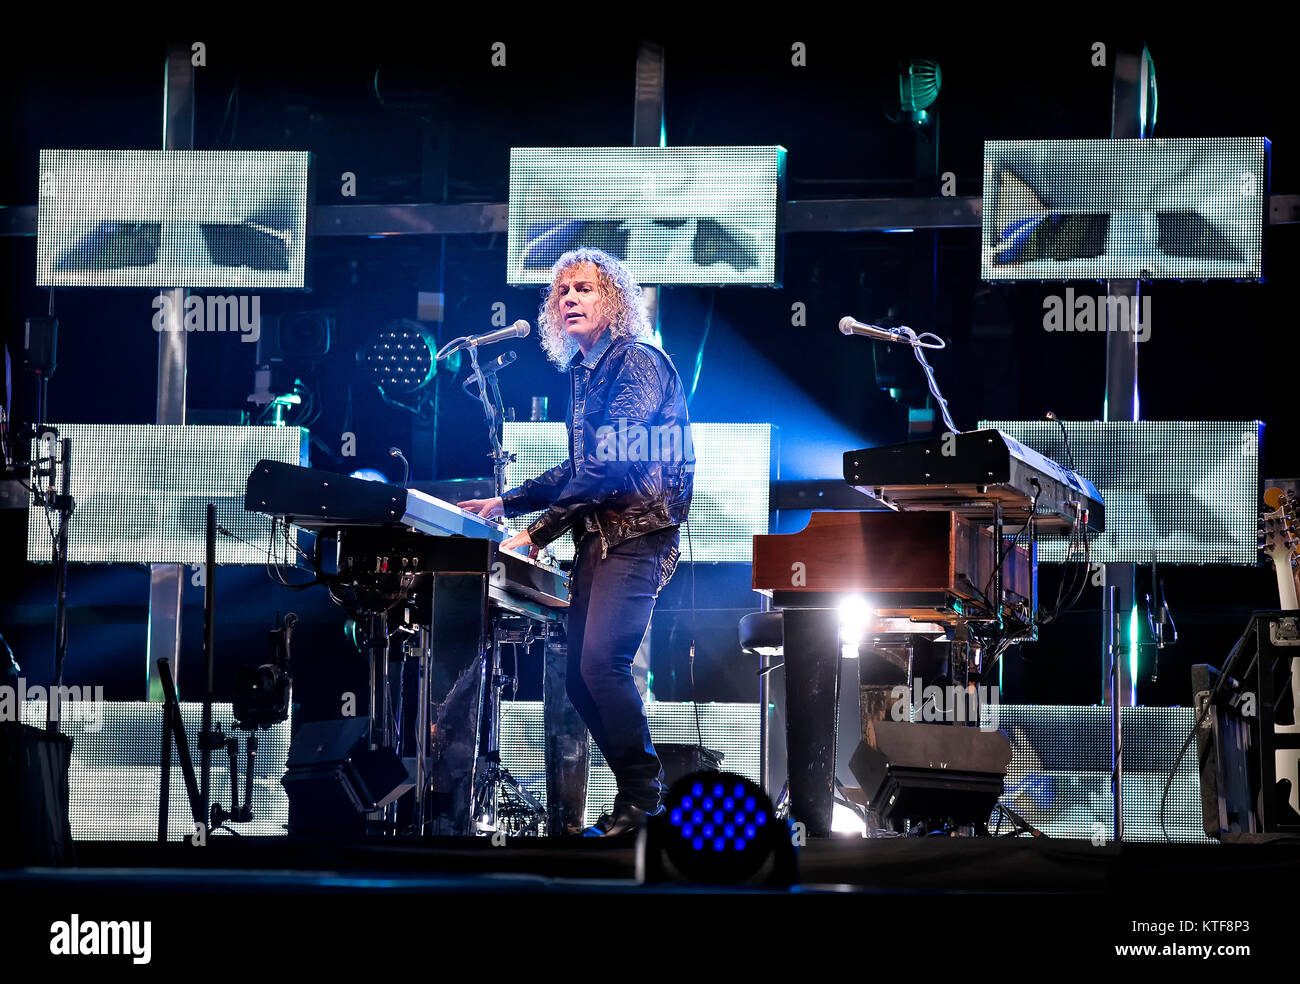 The American rock band Bon Jovi performs a live concert at Telenor Arena in Oslo. Here muscian David Bryan on keyboards is seen live on stage. Norway, 21/05 2013. Stock Photo